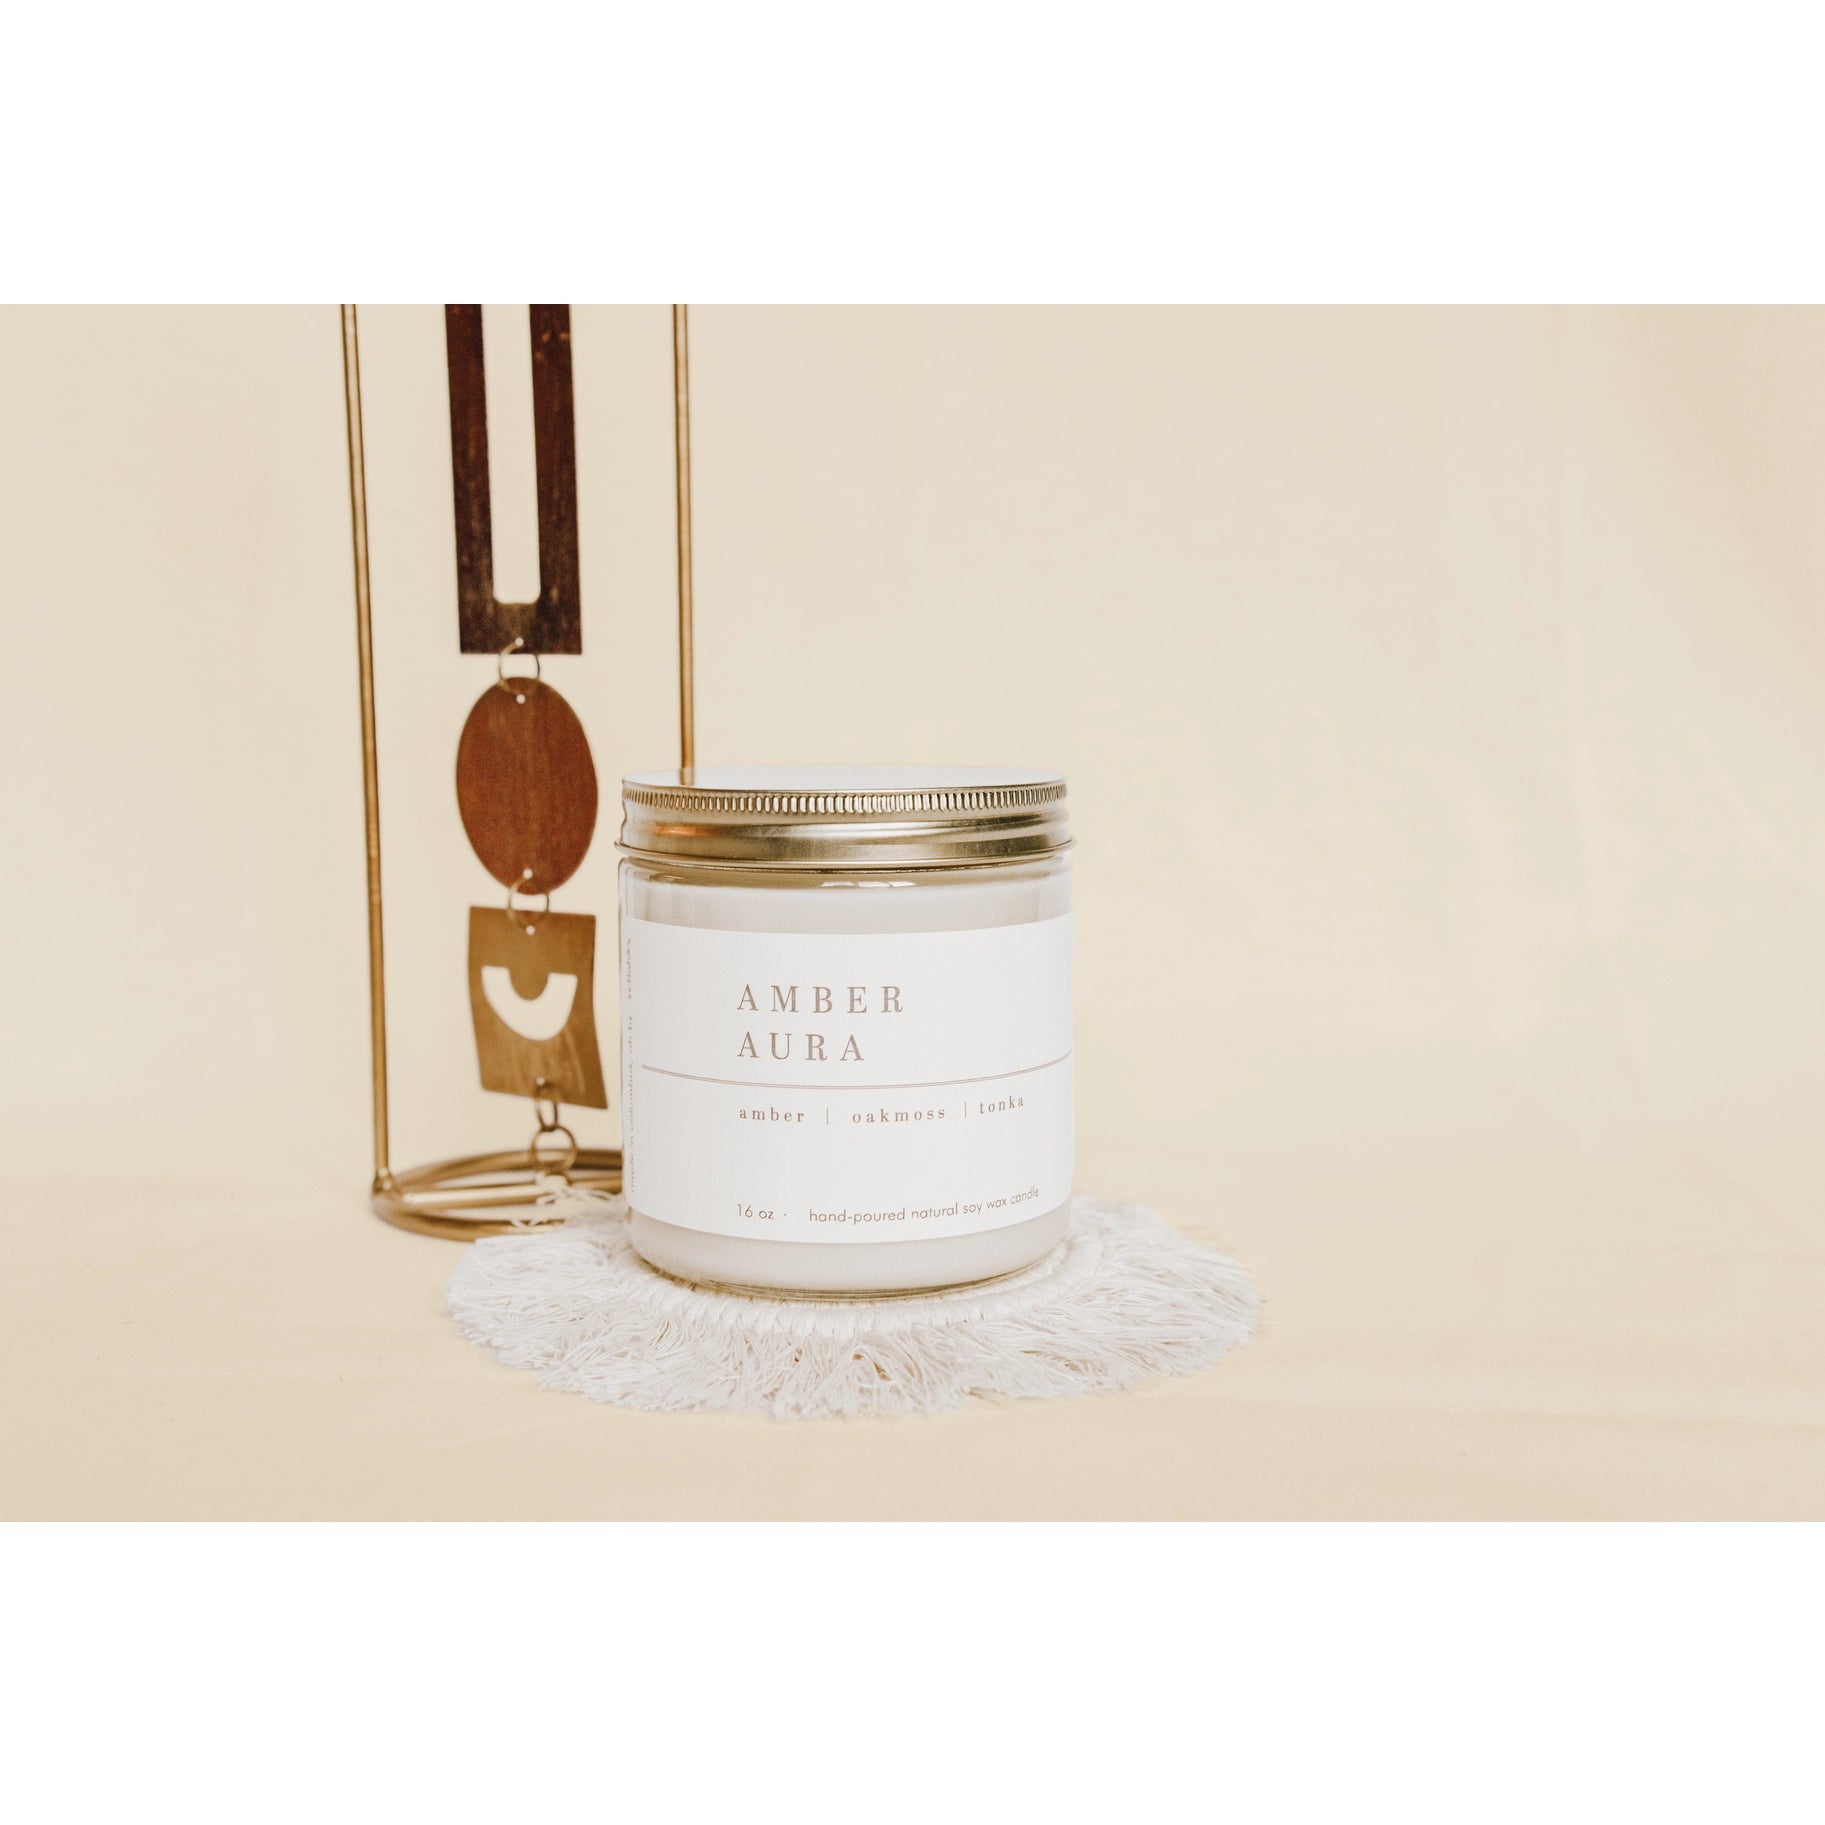 The Amber Aura Candle by Vellabox